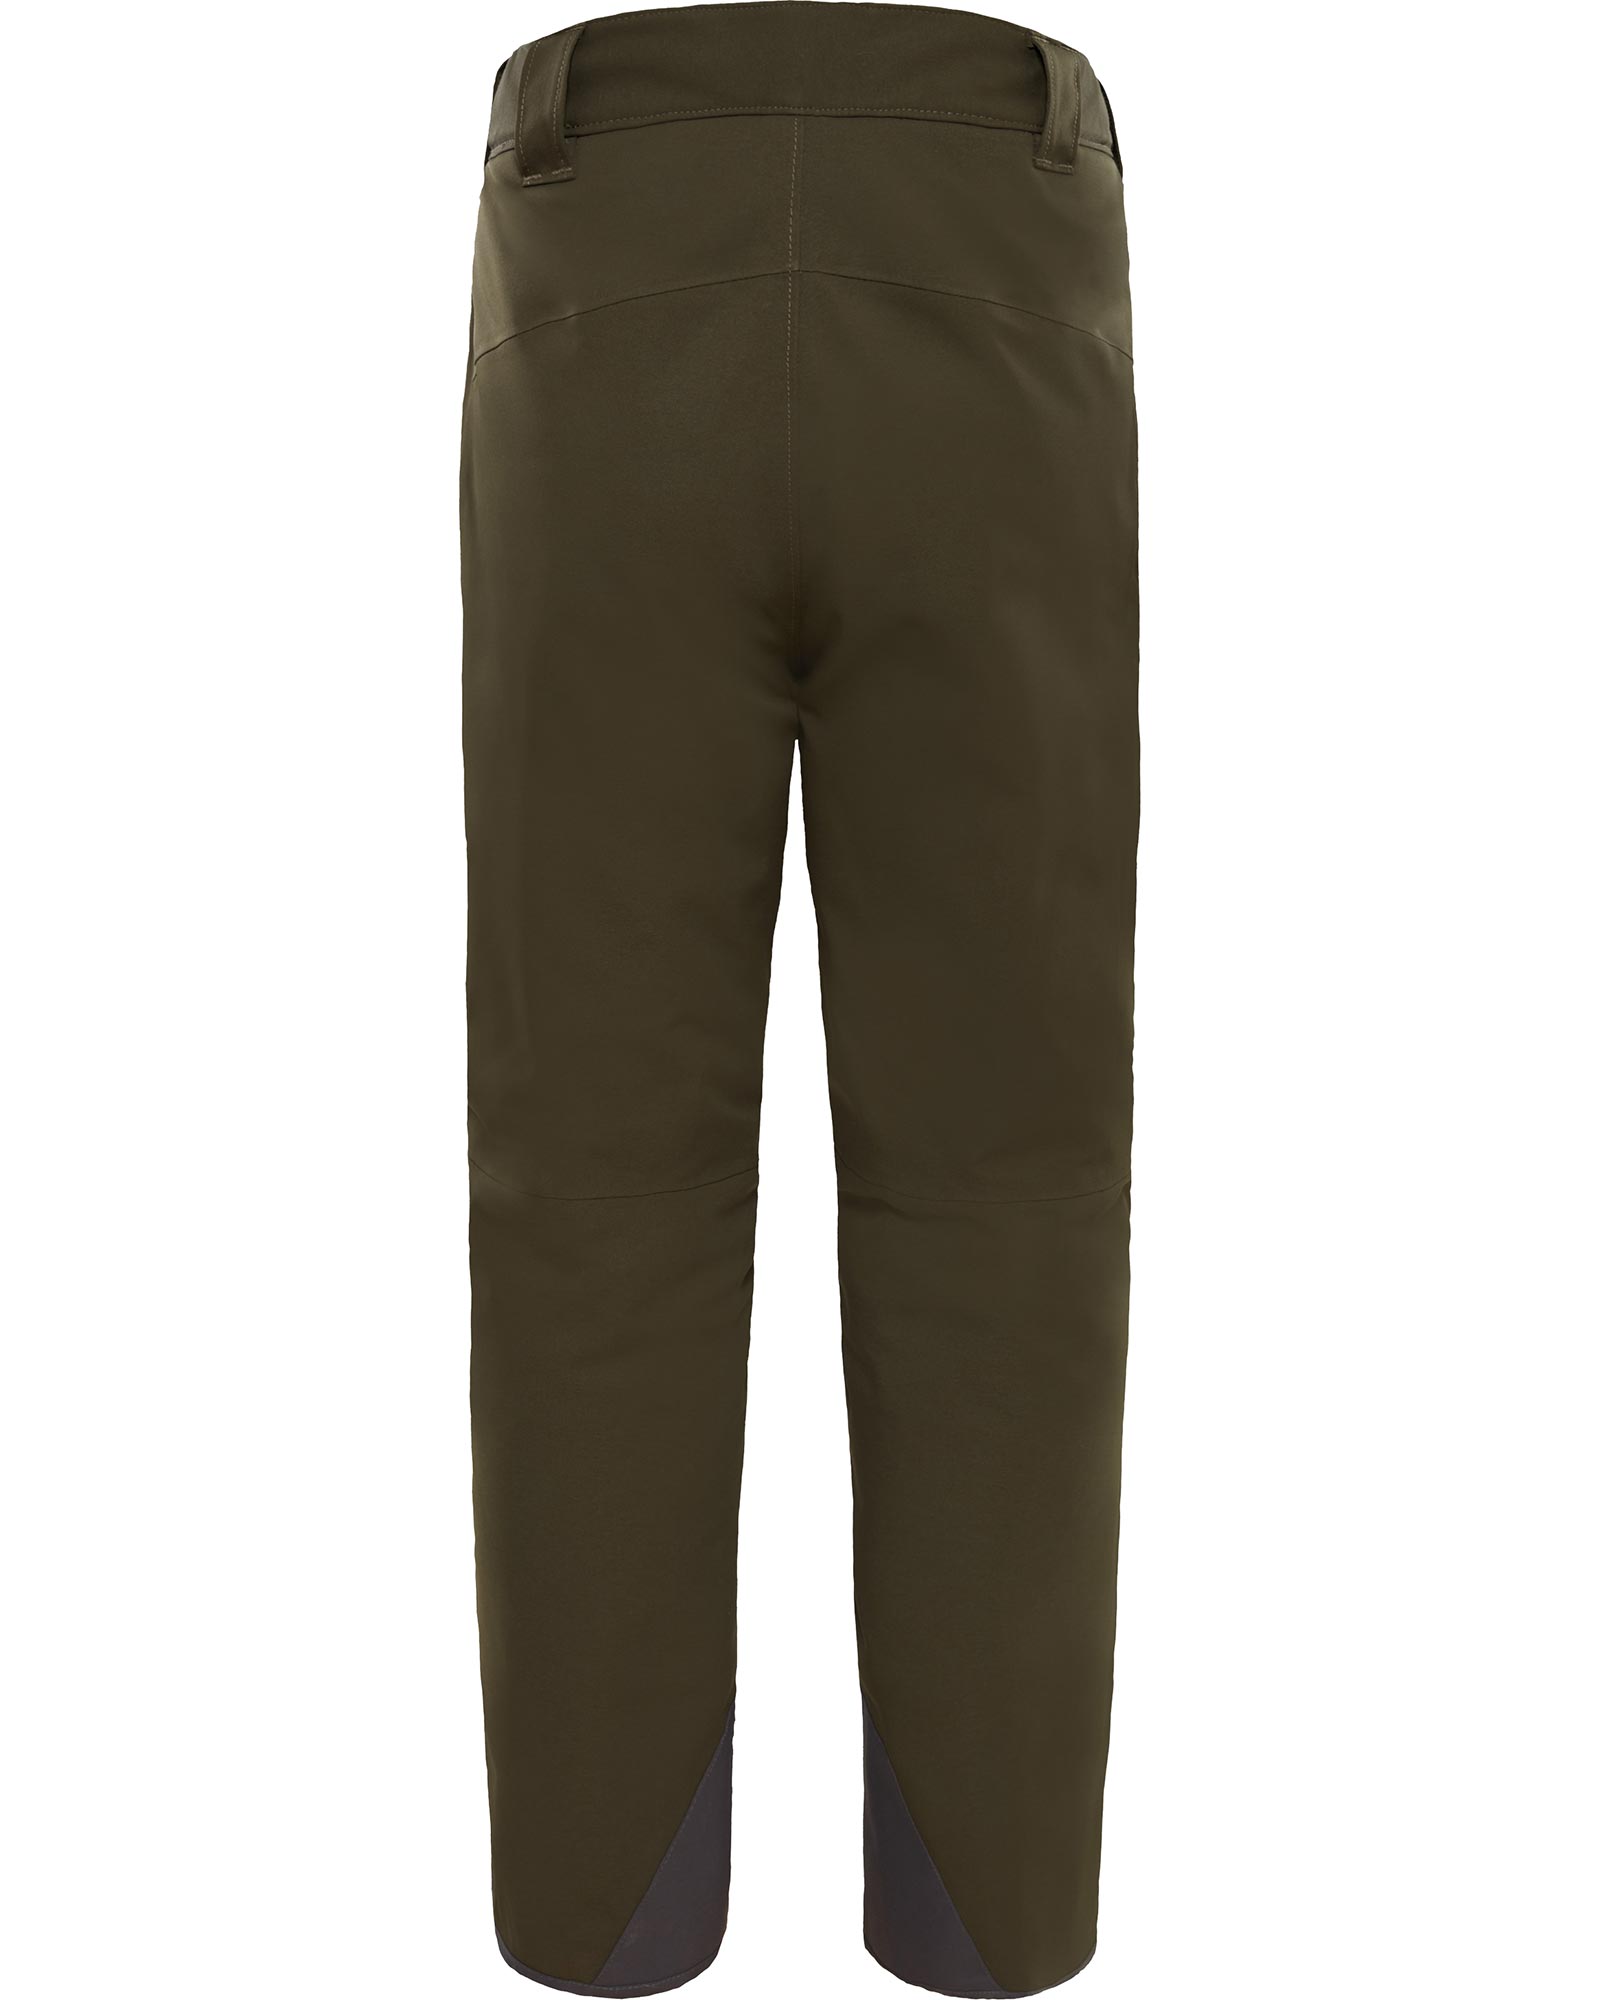 The North Face Chakal DryVent Boys’ Pants - New Taupe Green XS